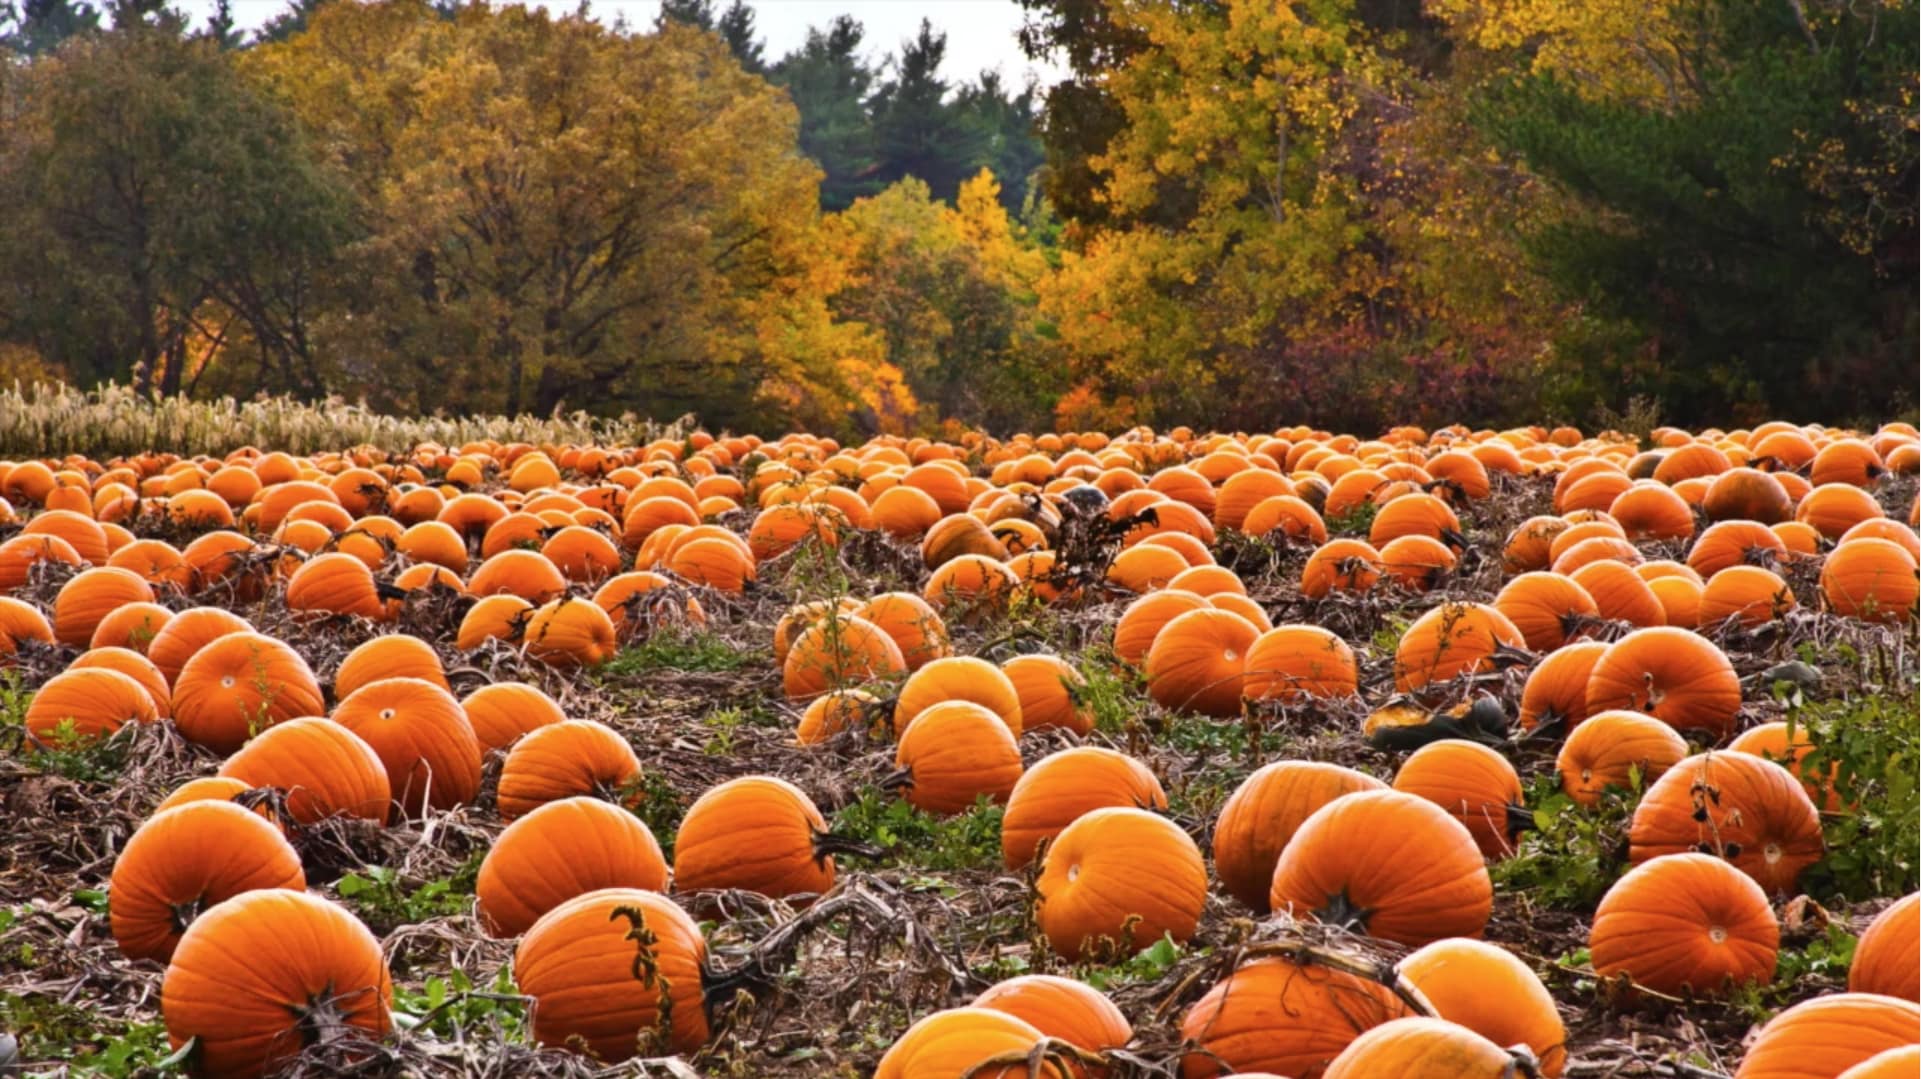 Why are pumpkins so popular every fall?